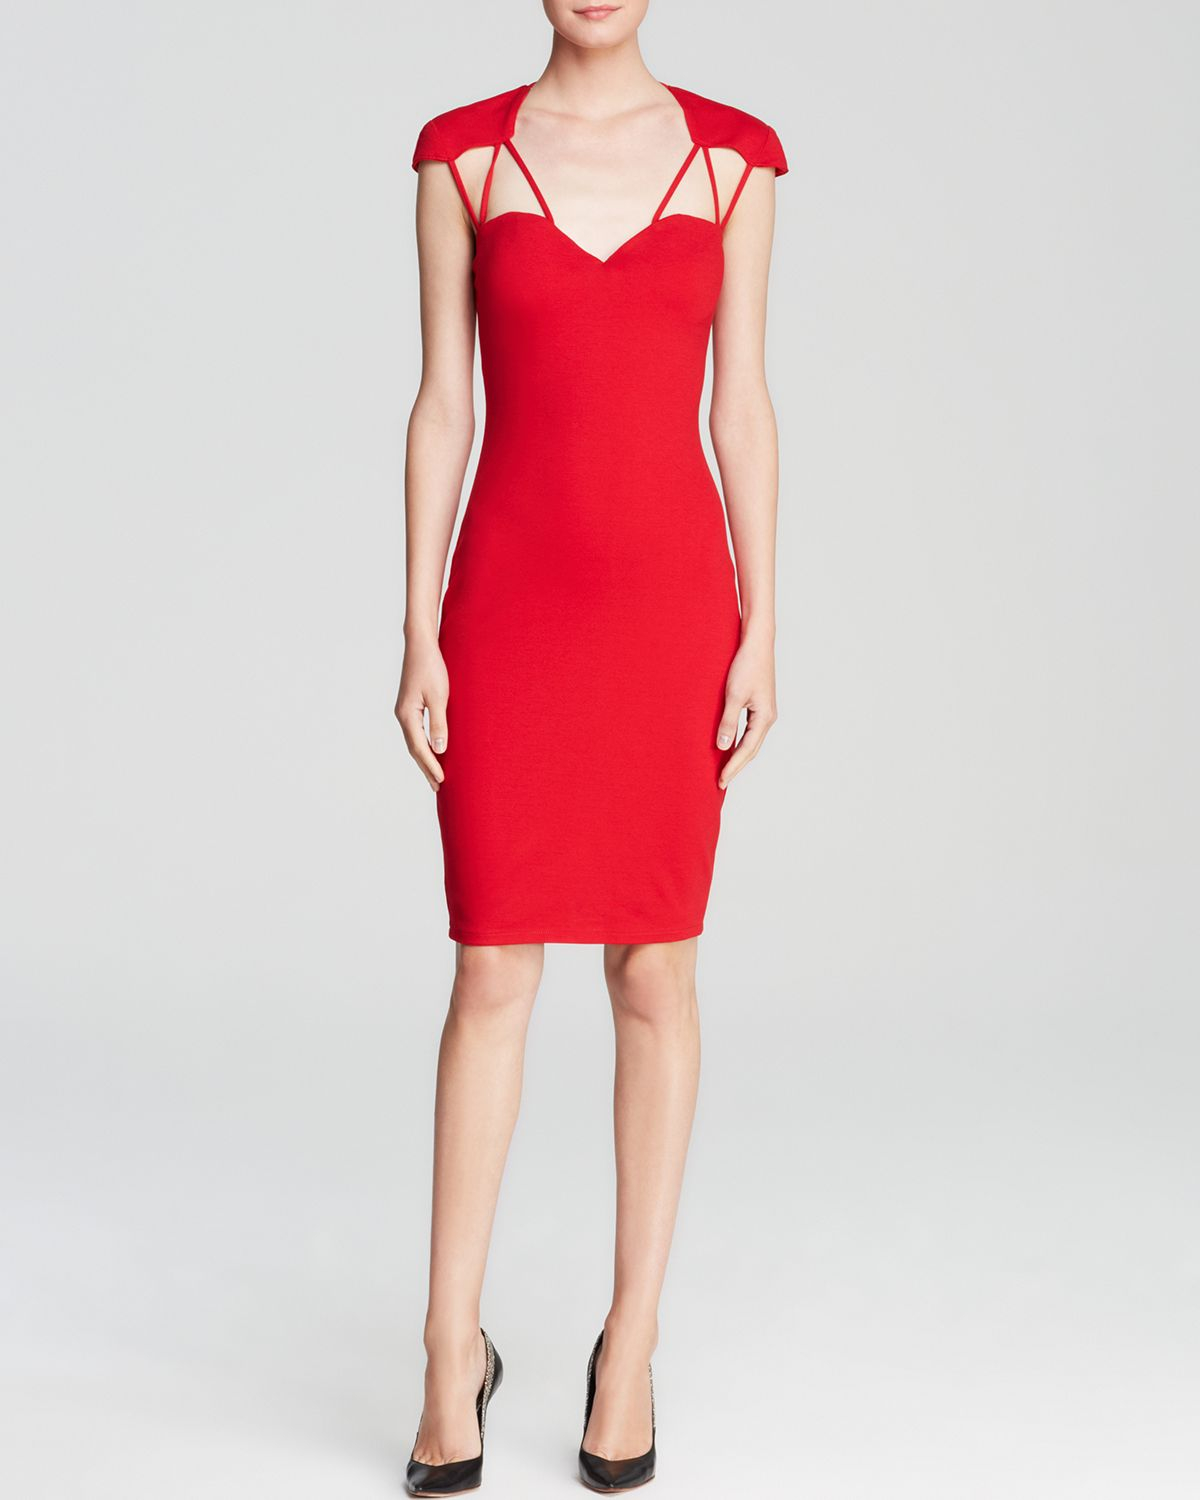 Guess Dress - Short Sleeve Strappy in Red - Lyst